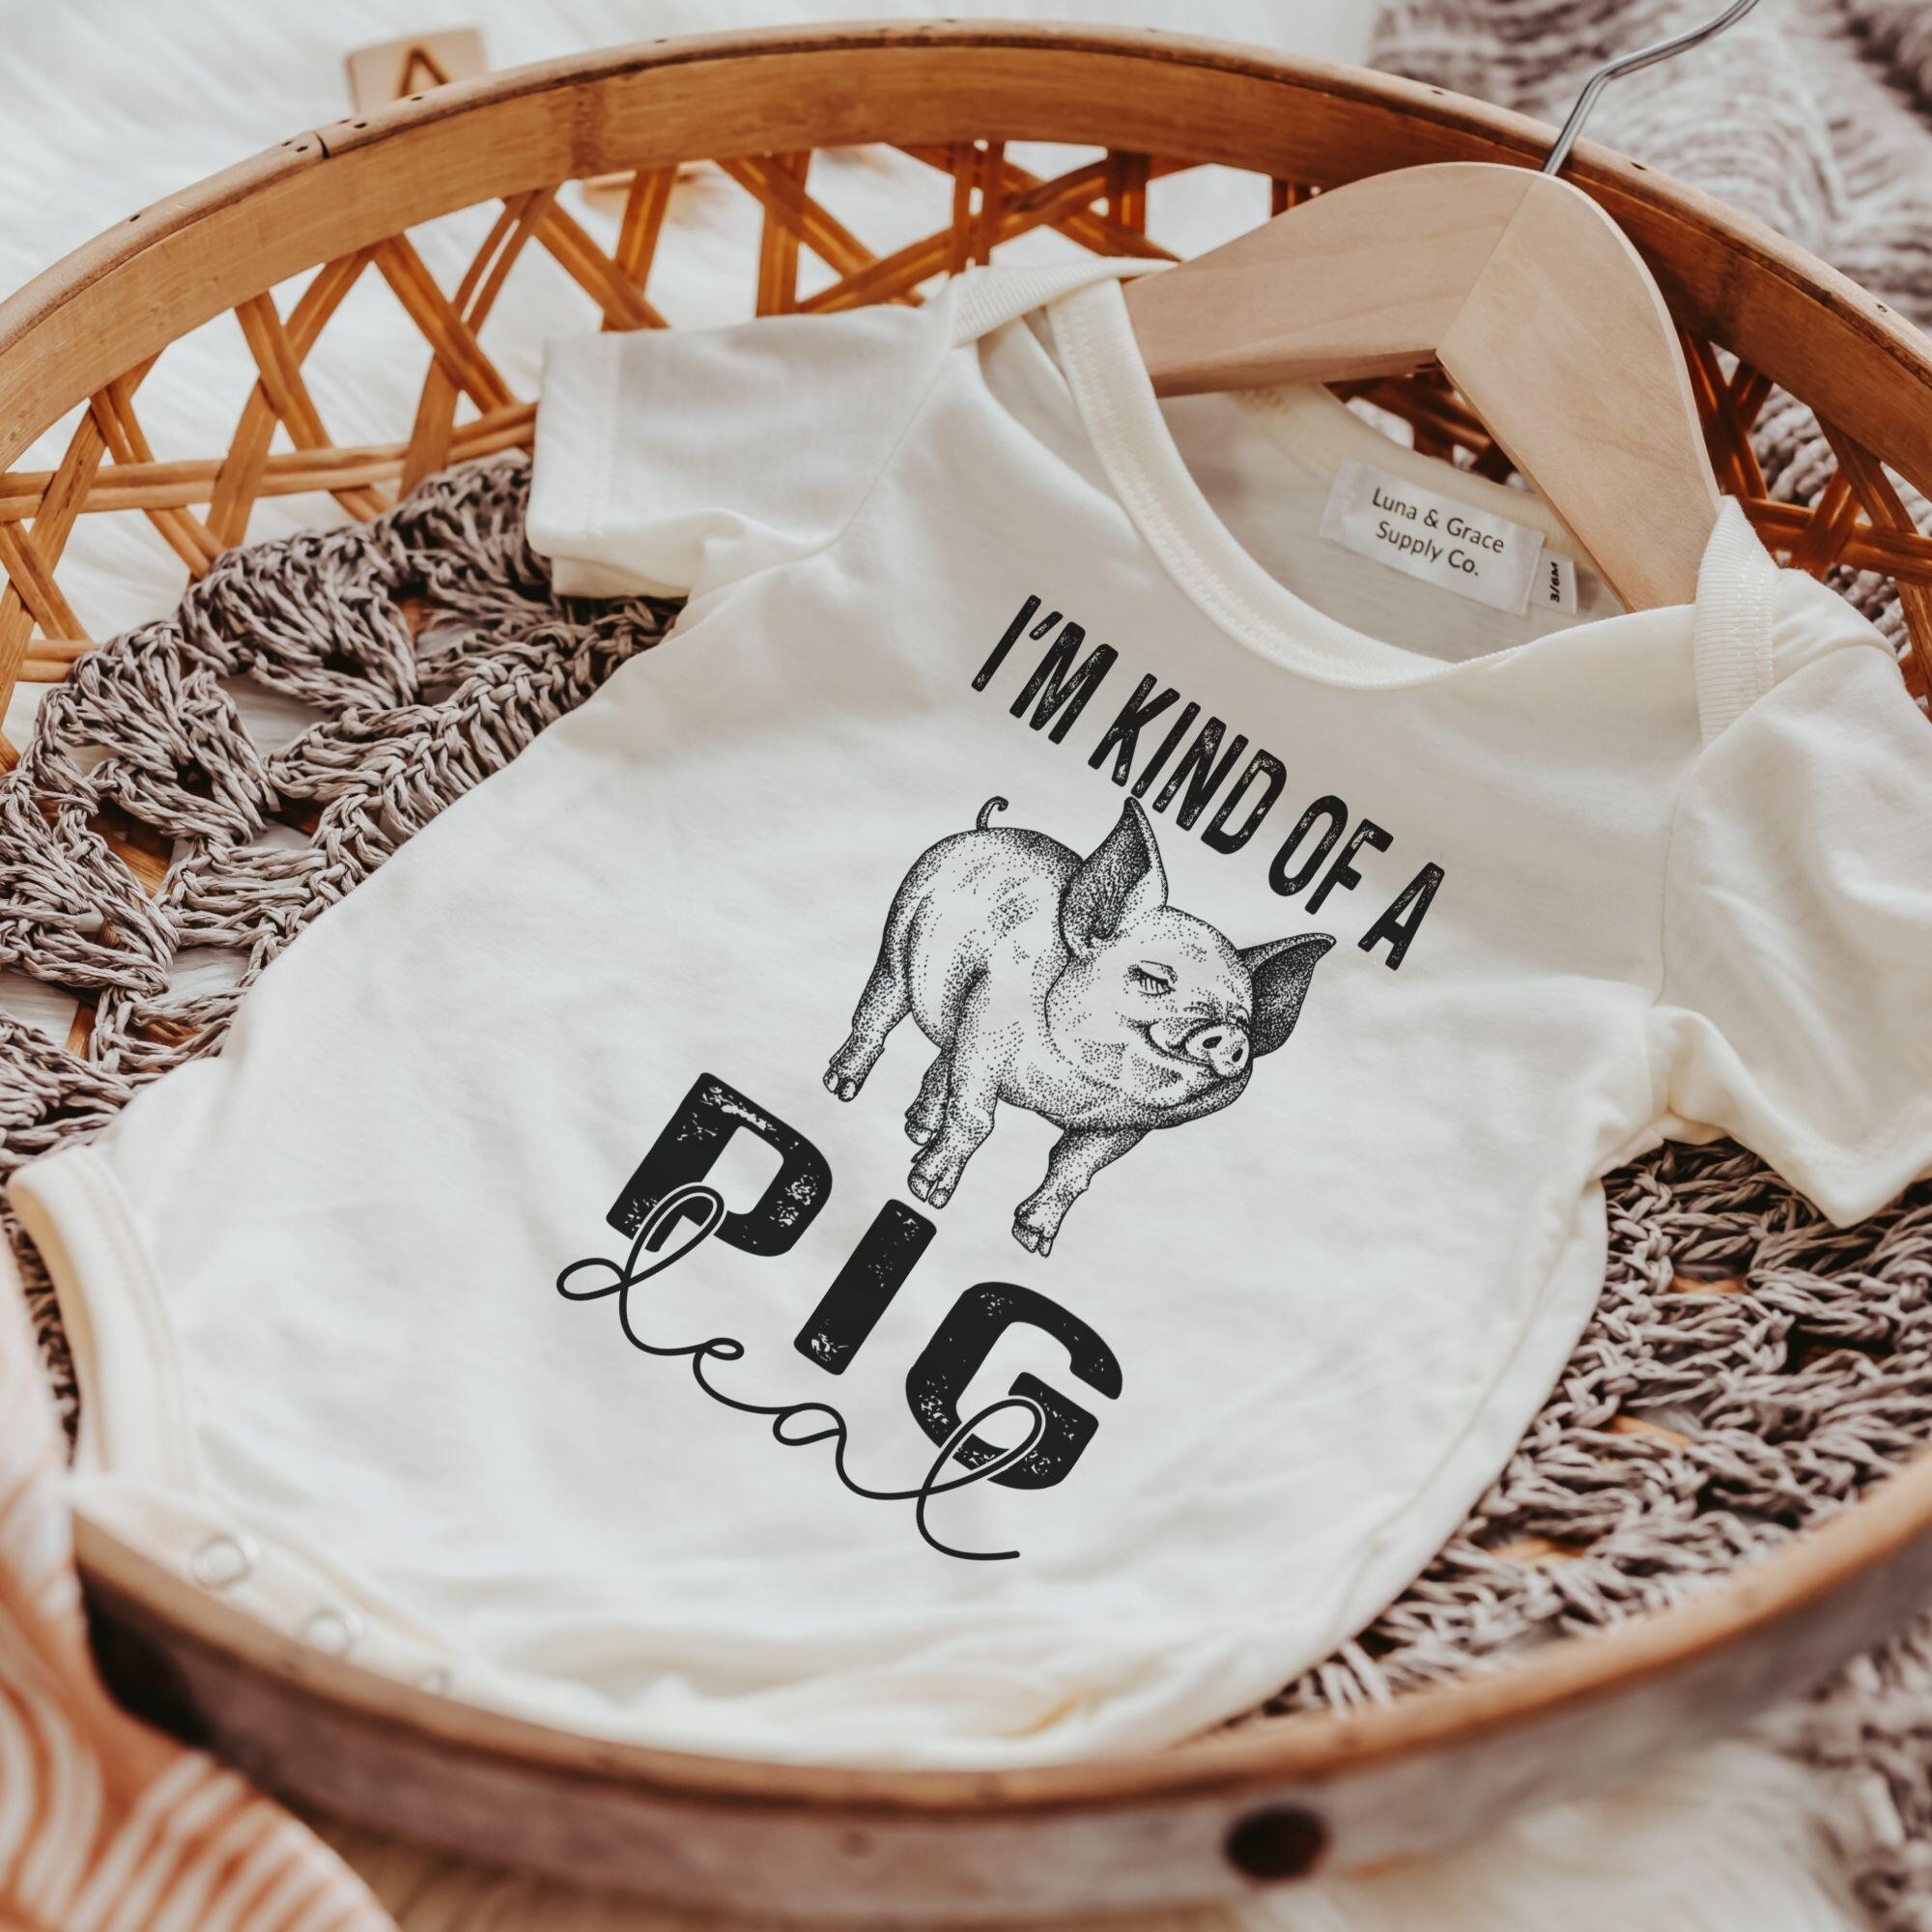 I'm kind of a pig deal outfit for baby